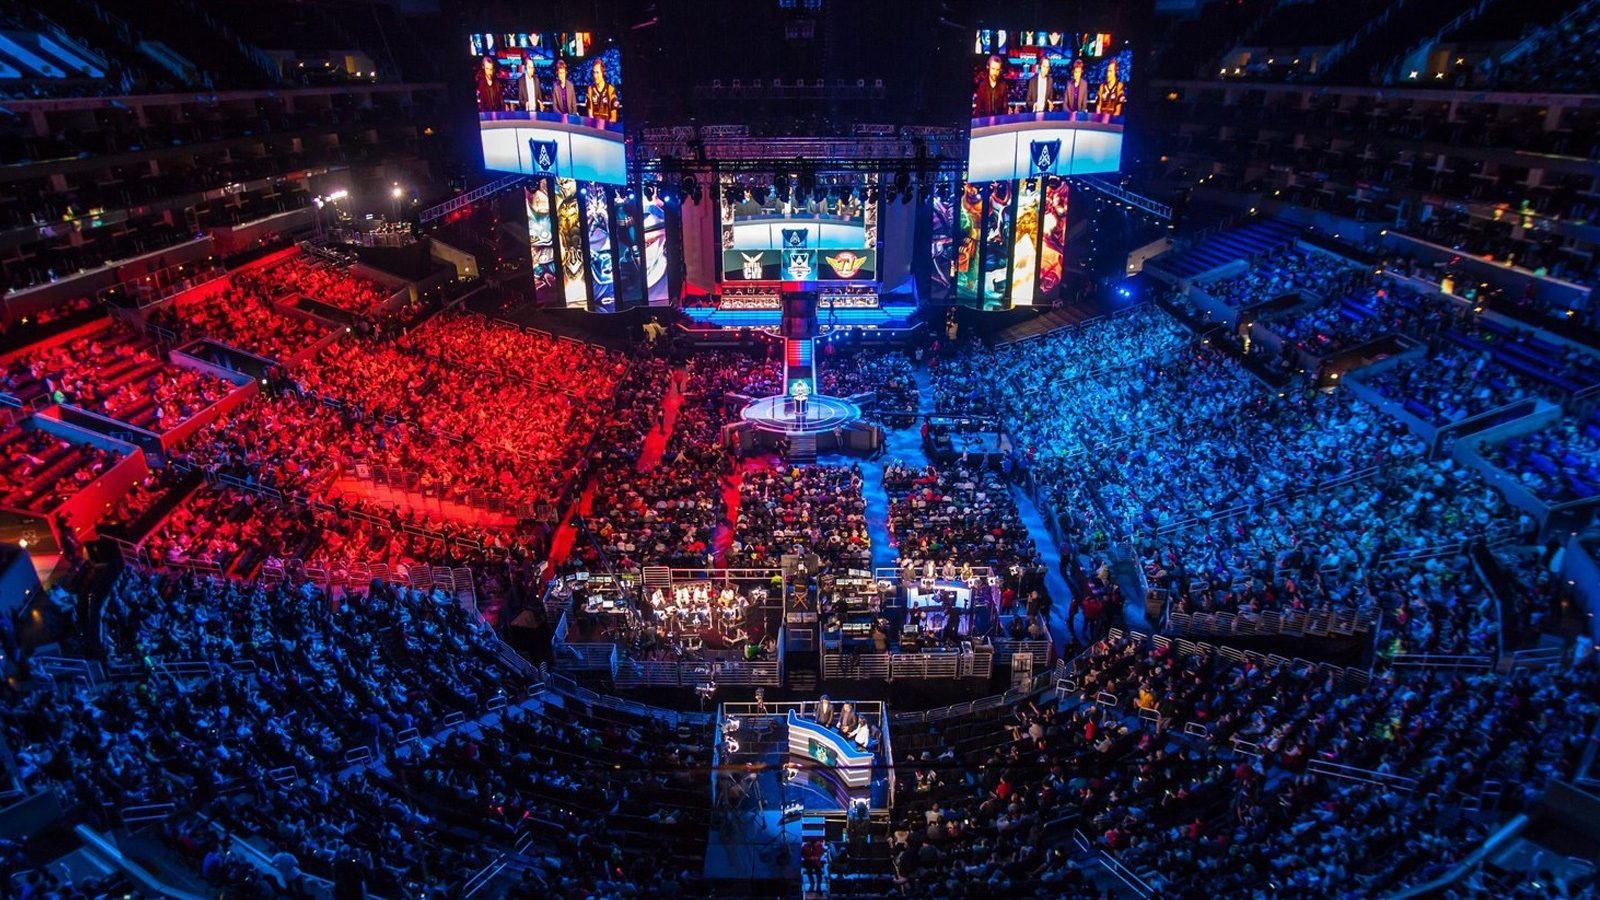 The groups have been drawn for the 2018 League of Legends World Championship 